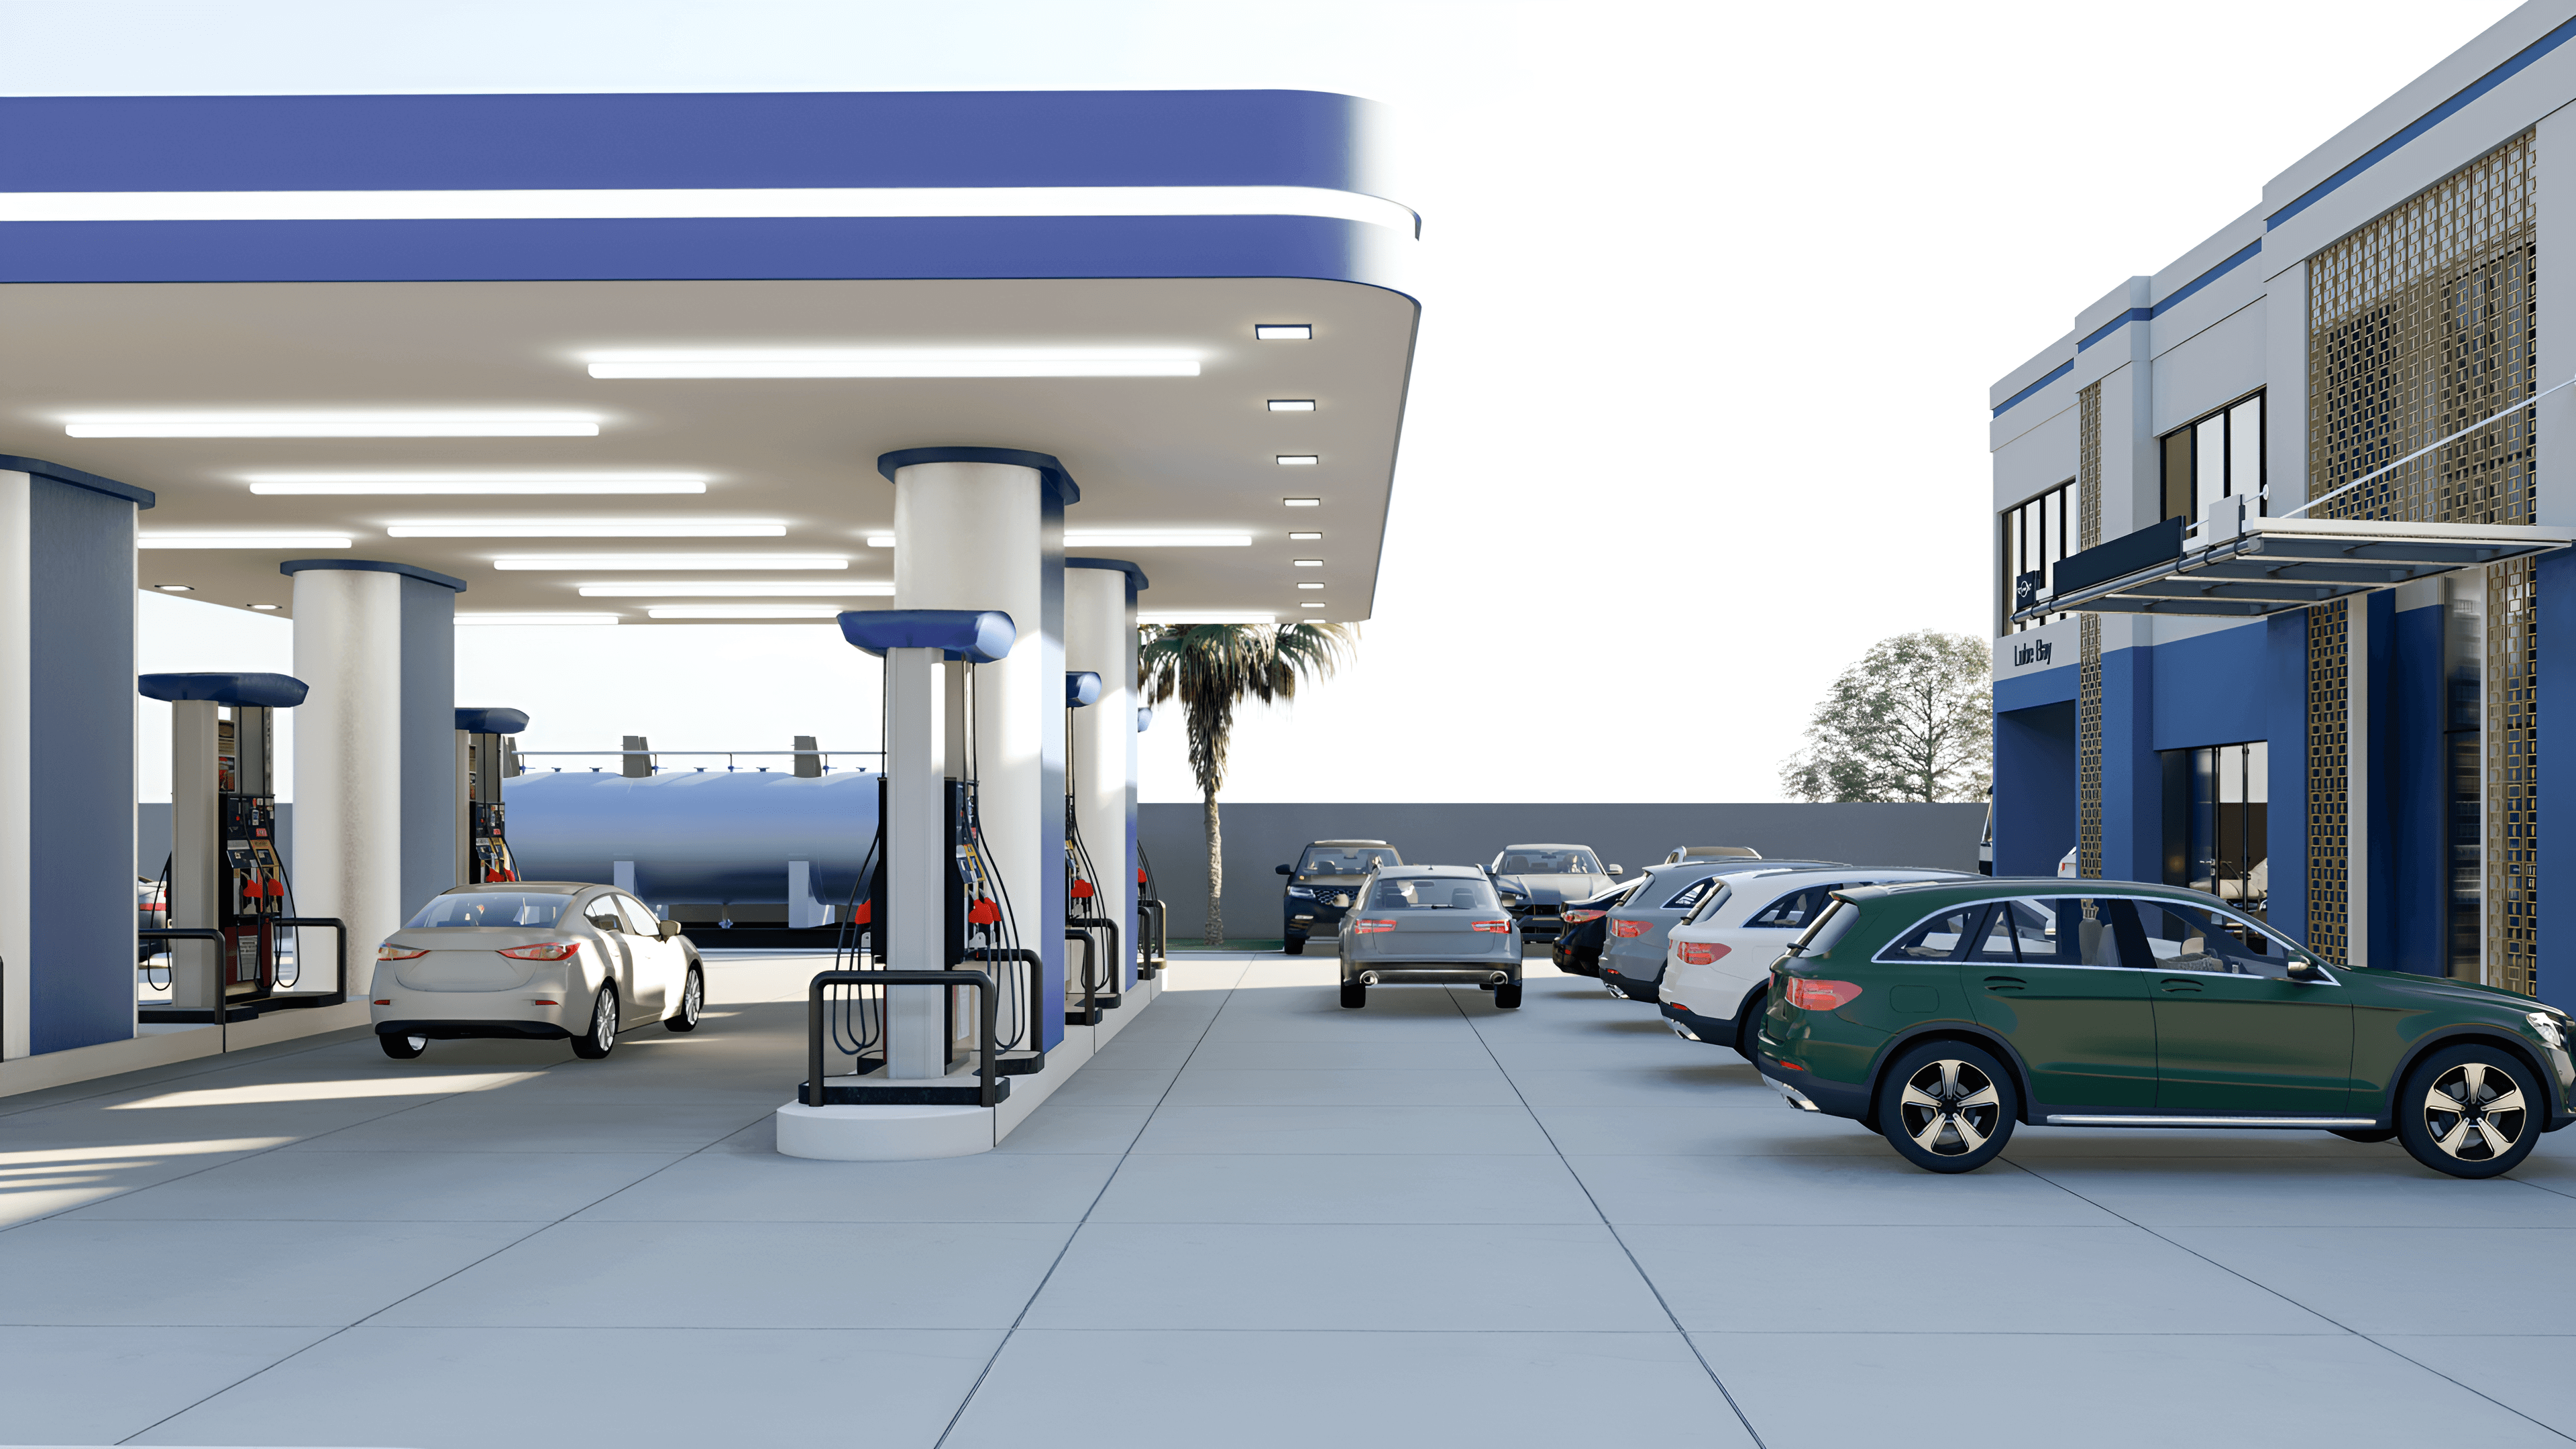 With EV adoption accelerating, gas stations can attract new customers and retain existing customers by installing EV chargers.